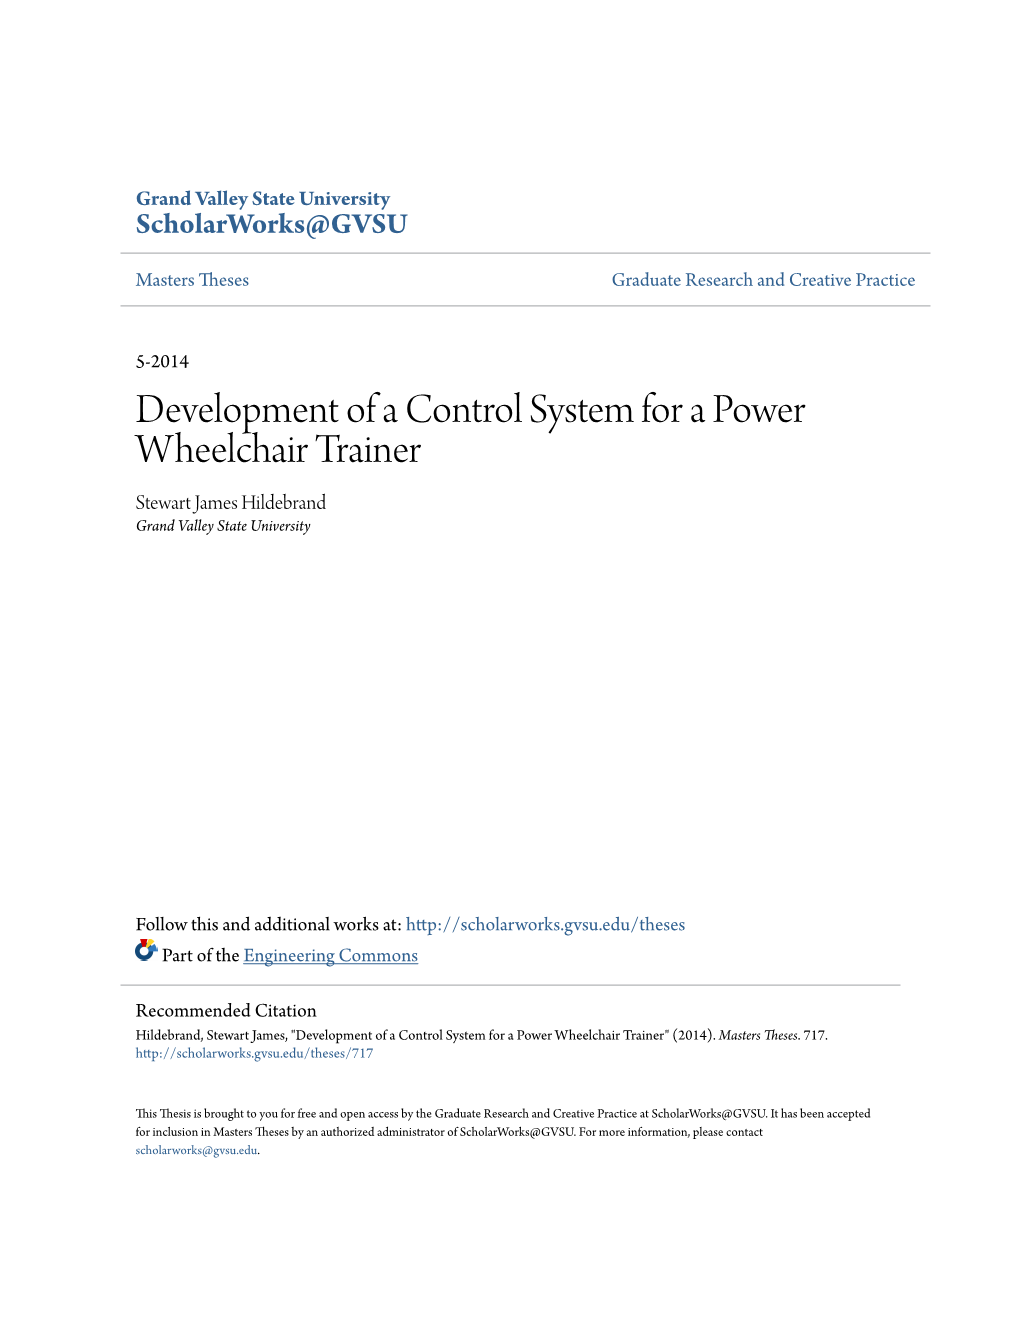 Development of a Control System for a Power Wheelchair Trainer Stewart James Hildebrand Grand Valley State University